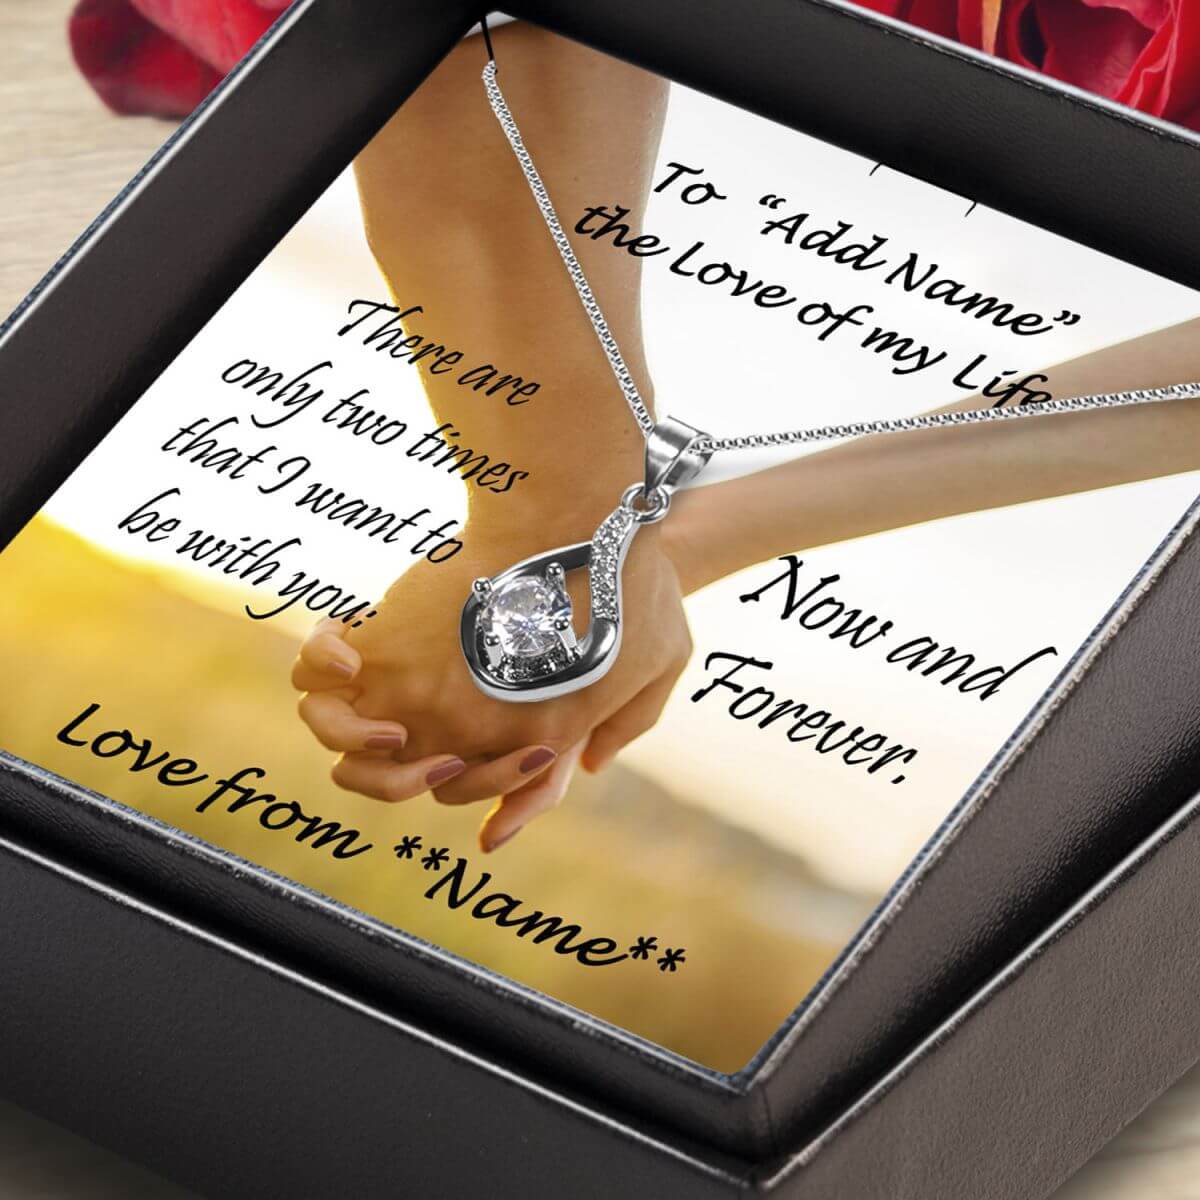 Necklace-Box-angled-close-up-Love-Drop-Love-of-My-Life-personalised-BIG-ON-Jewellery-BIG-ON-Necklaces